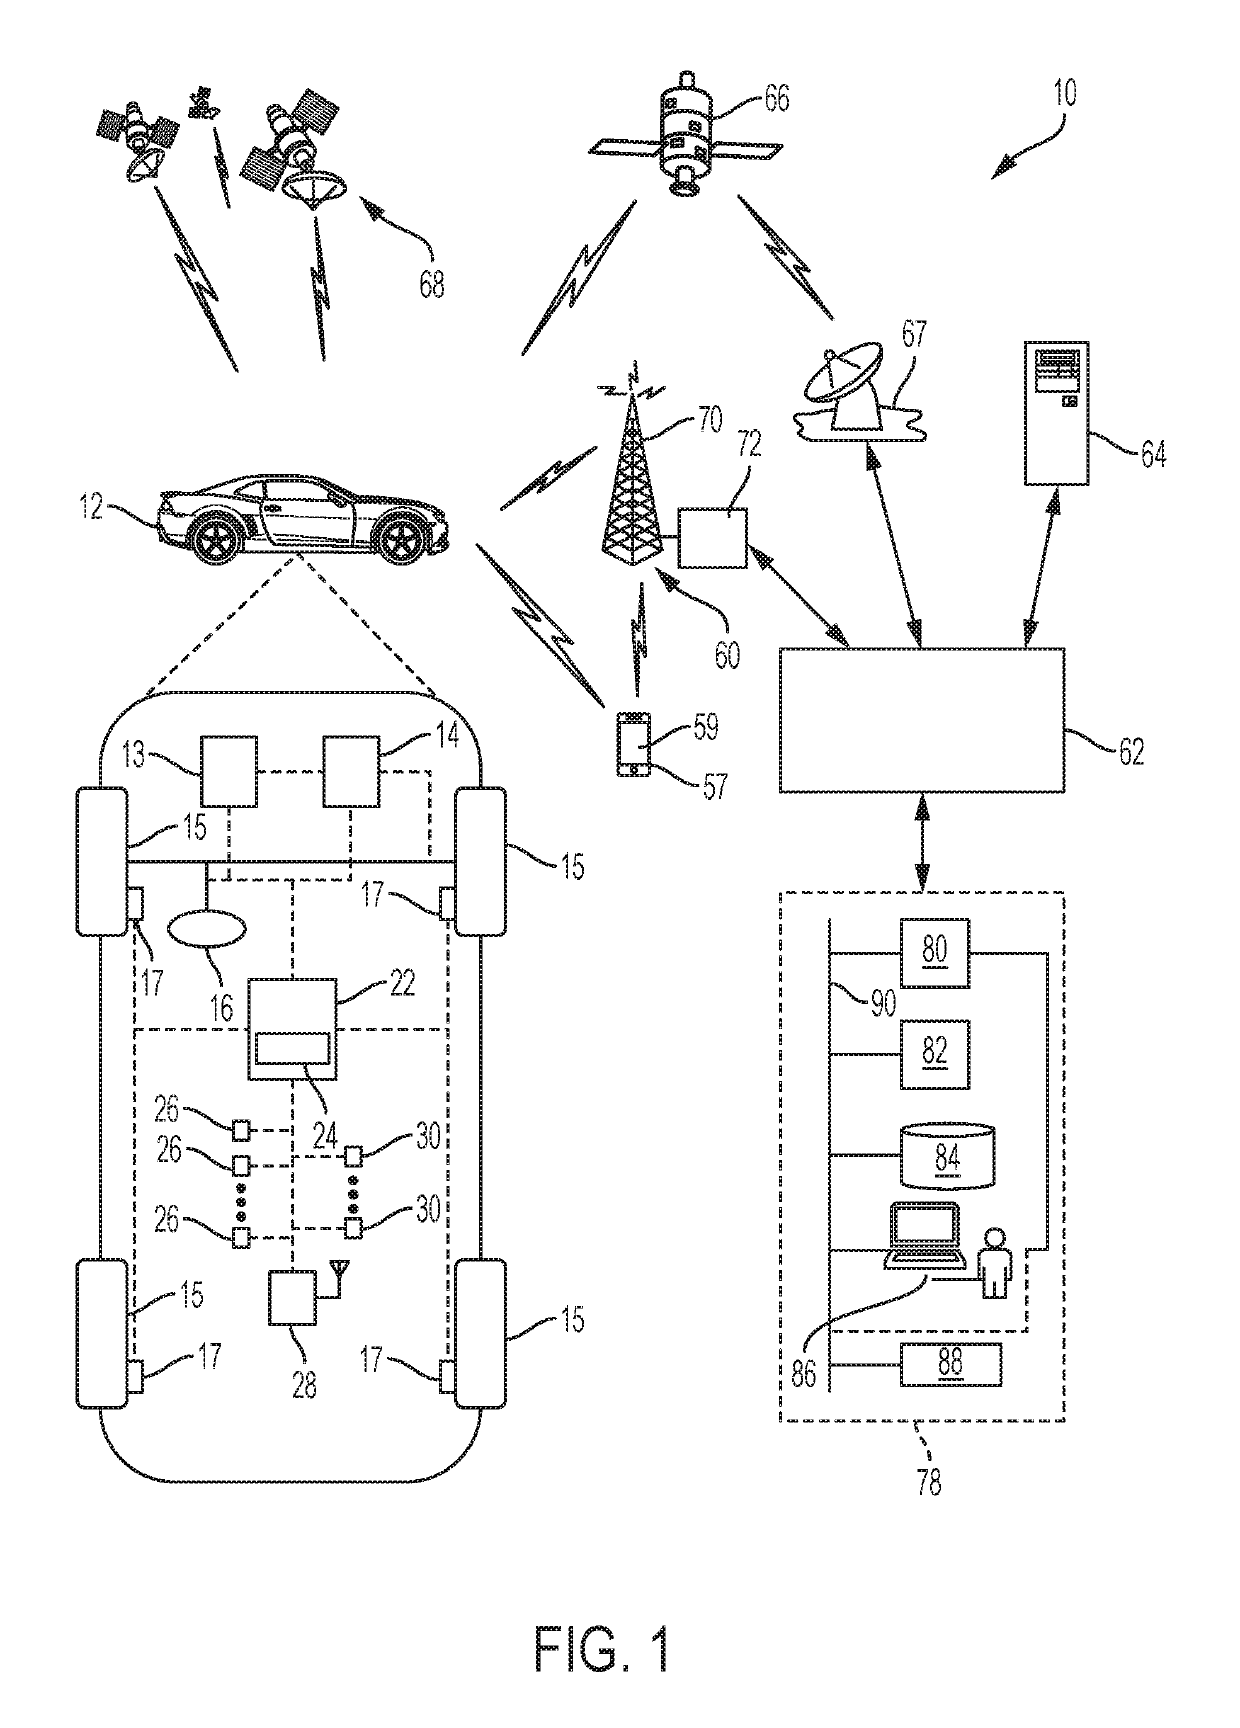 Methods and systems for remote parking assistance